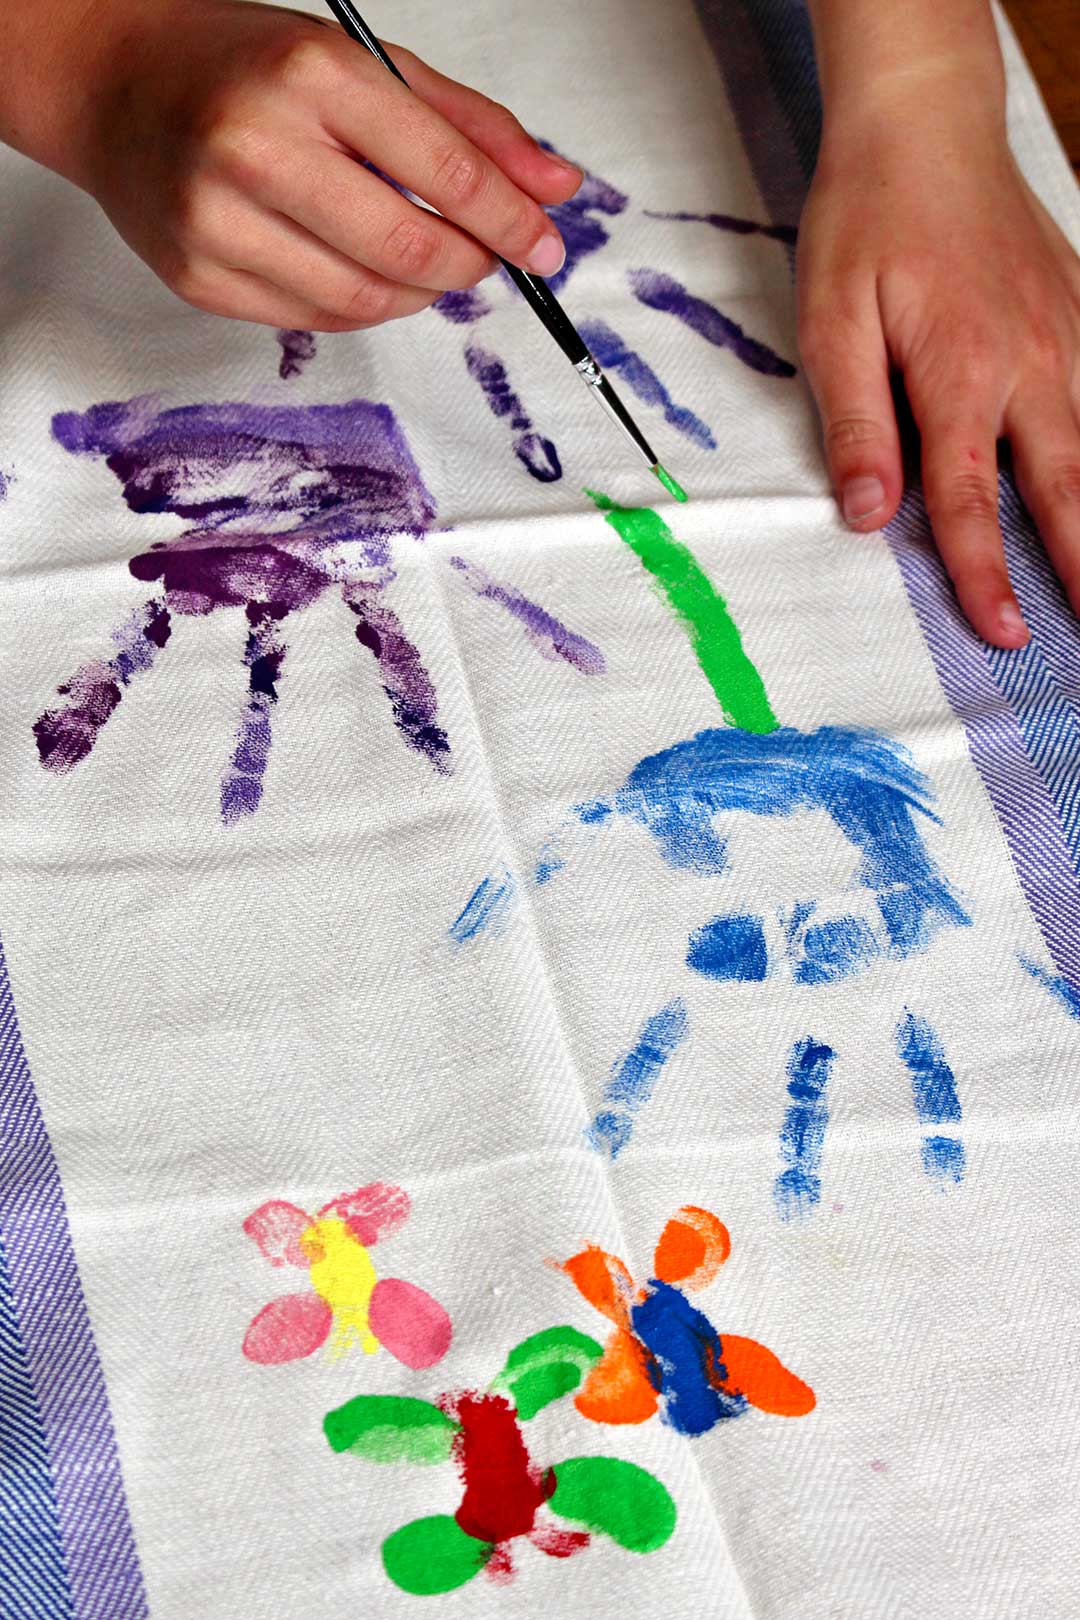 A child painting a green stem on a blue handprint to create a flower on fabric..